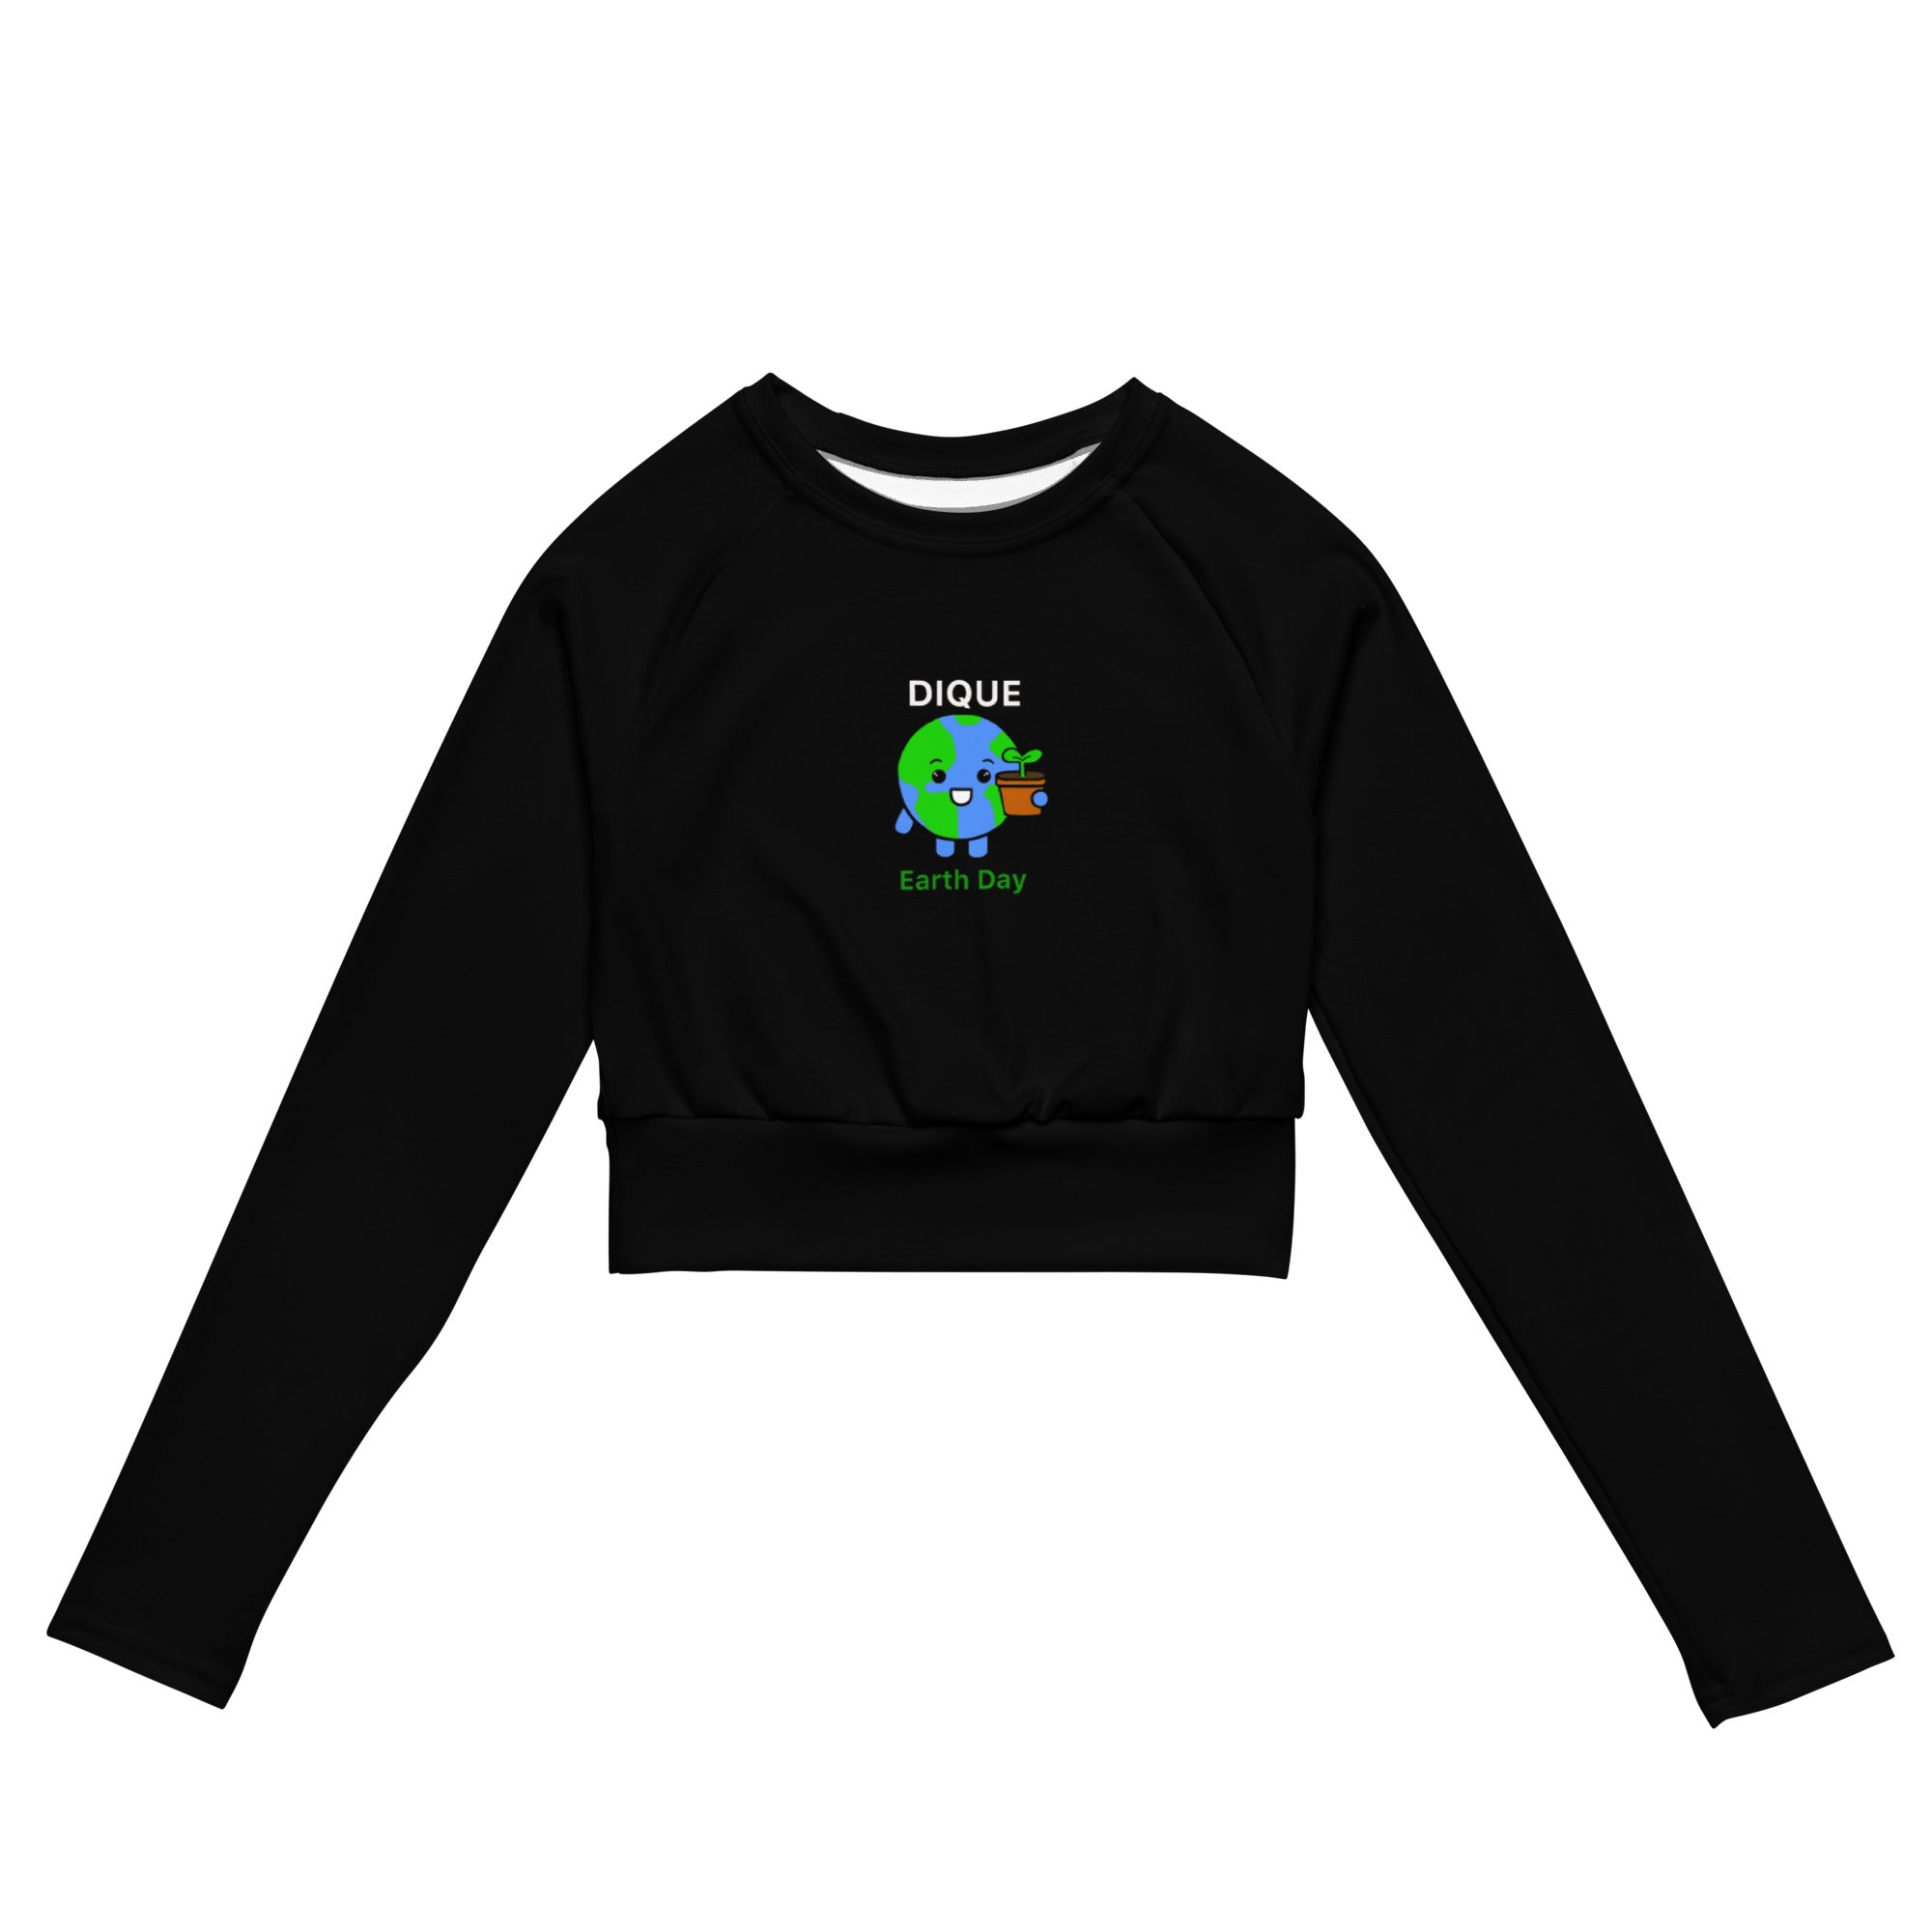 Dique Earth Day Recycled Long-Sleeve Crop Top